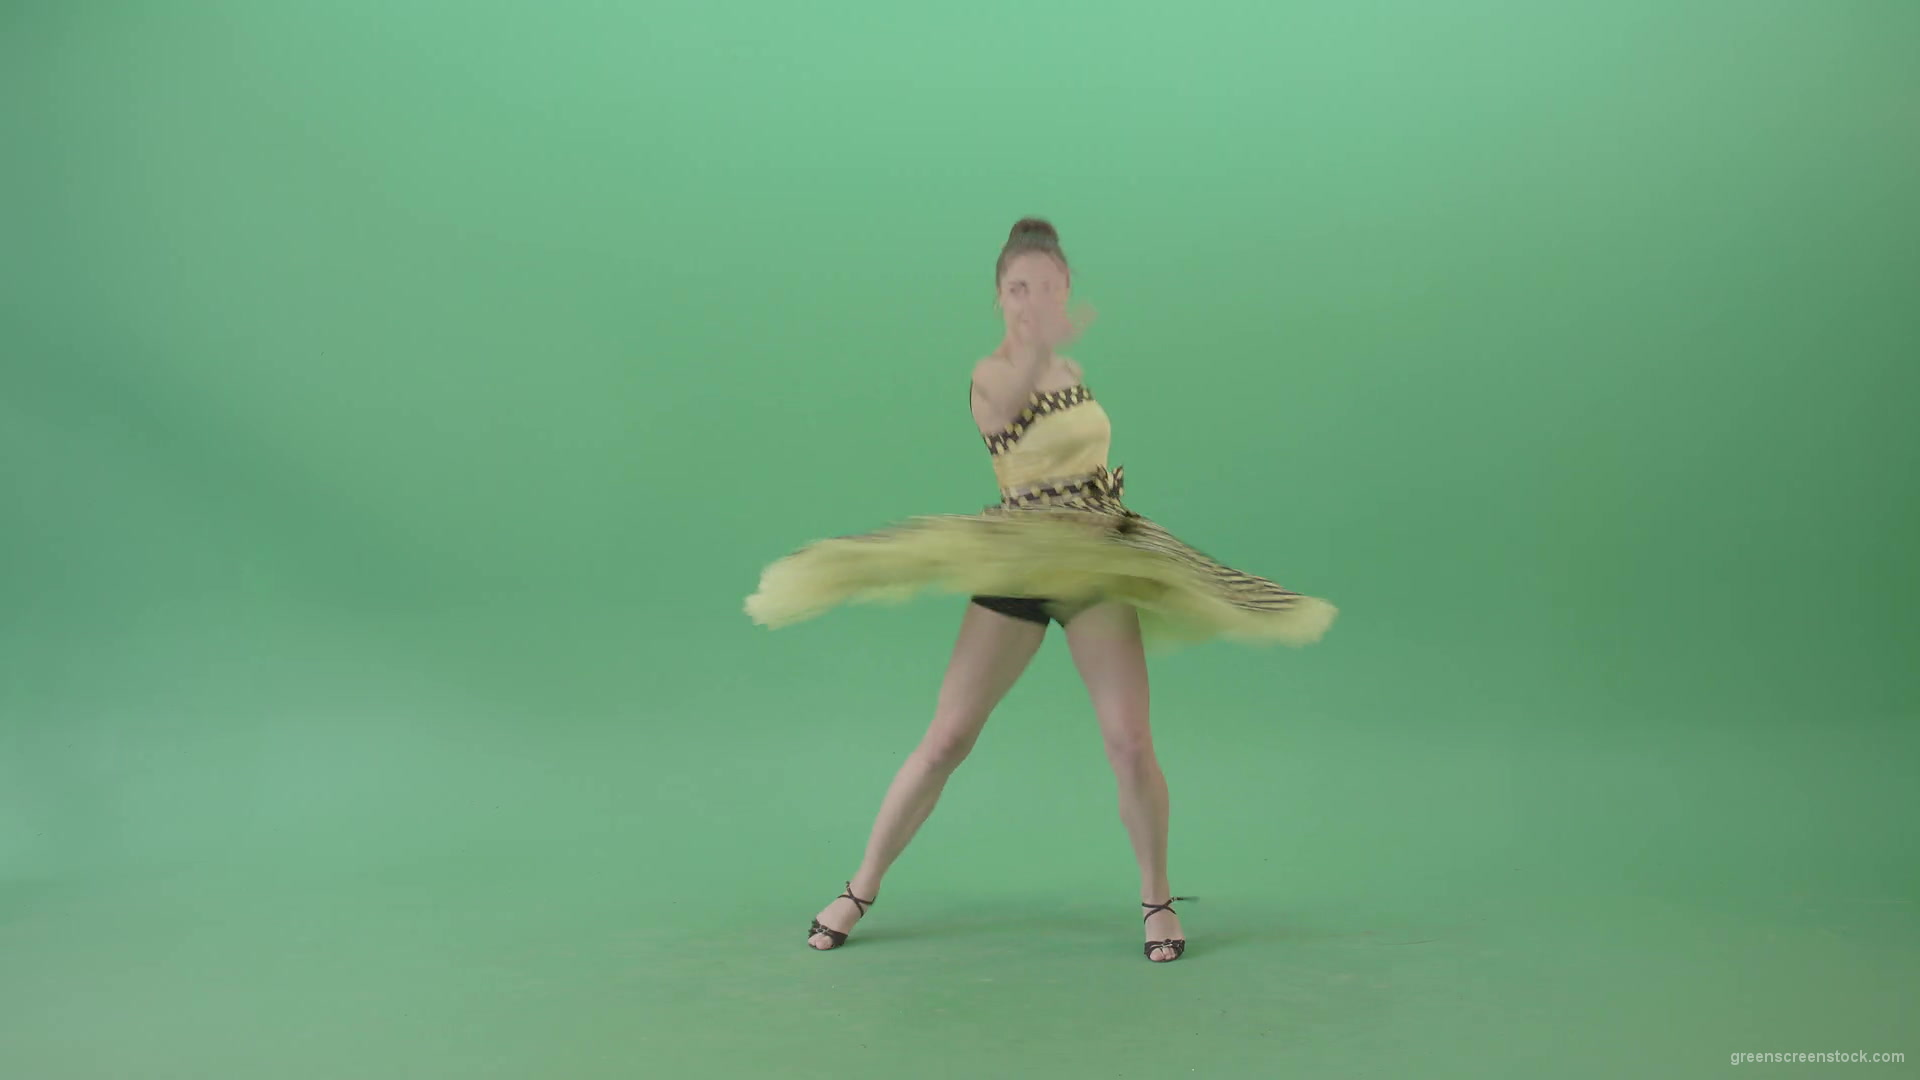 Happy-Woman-dancing-Rock-and-Roll-Jazz-Swing-Boogie-woogie-isolated-on-Green-Screen-4K-Video-Footage-1920_007 Green Screen Stock